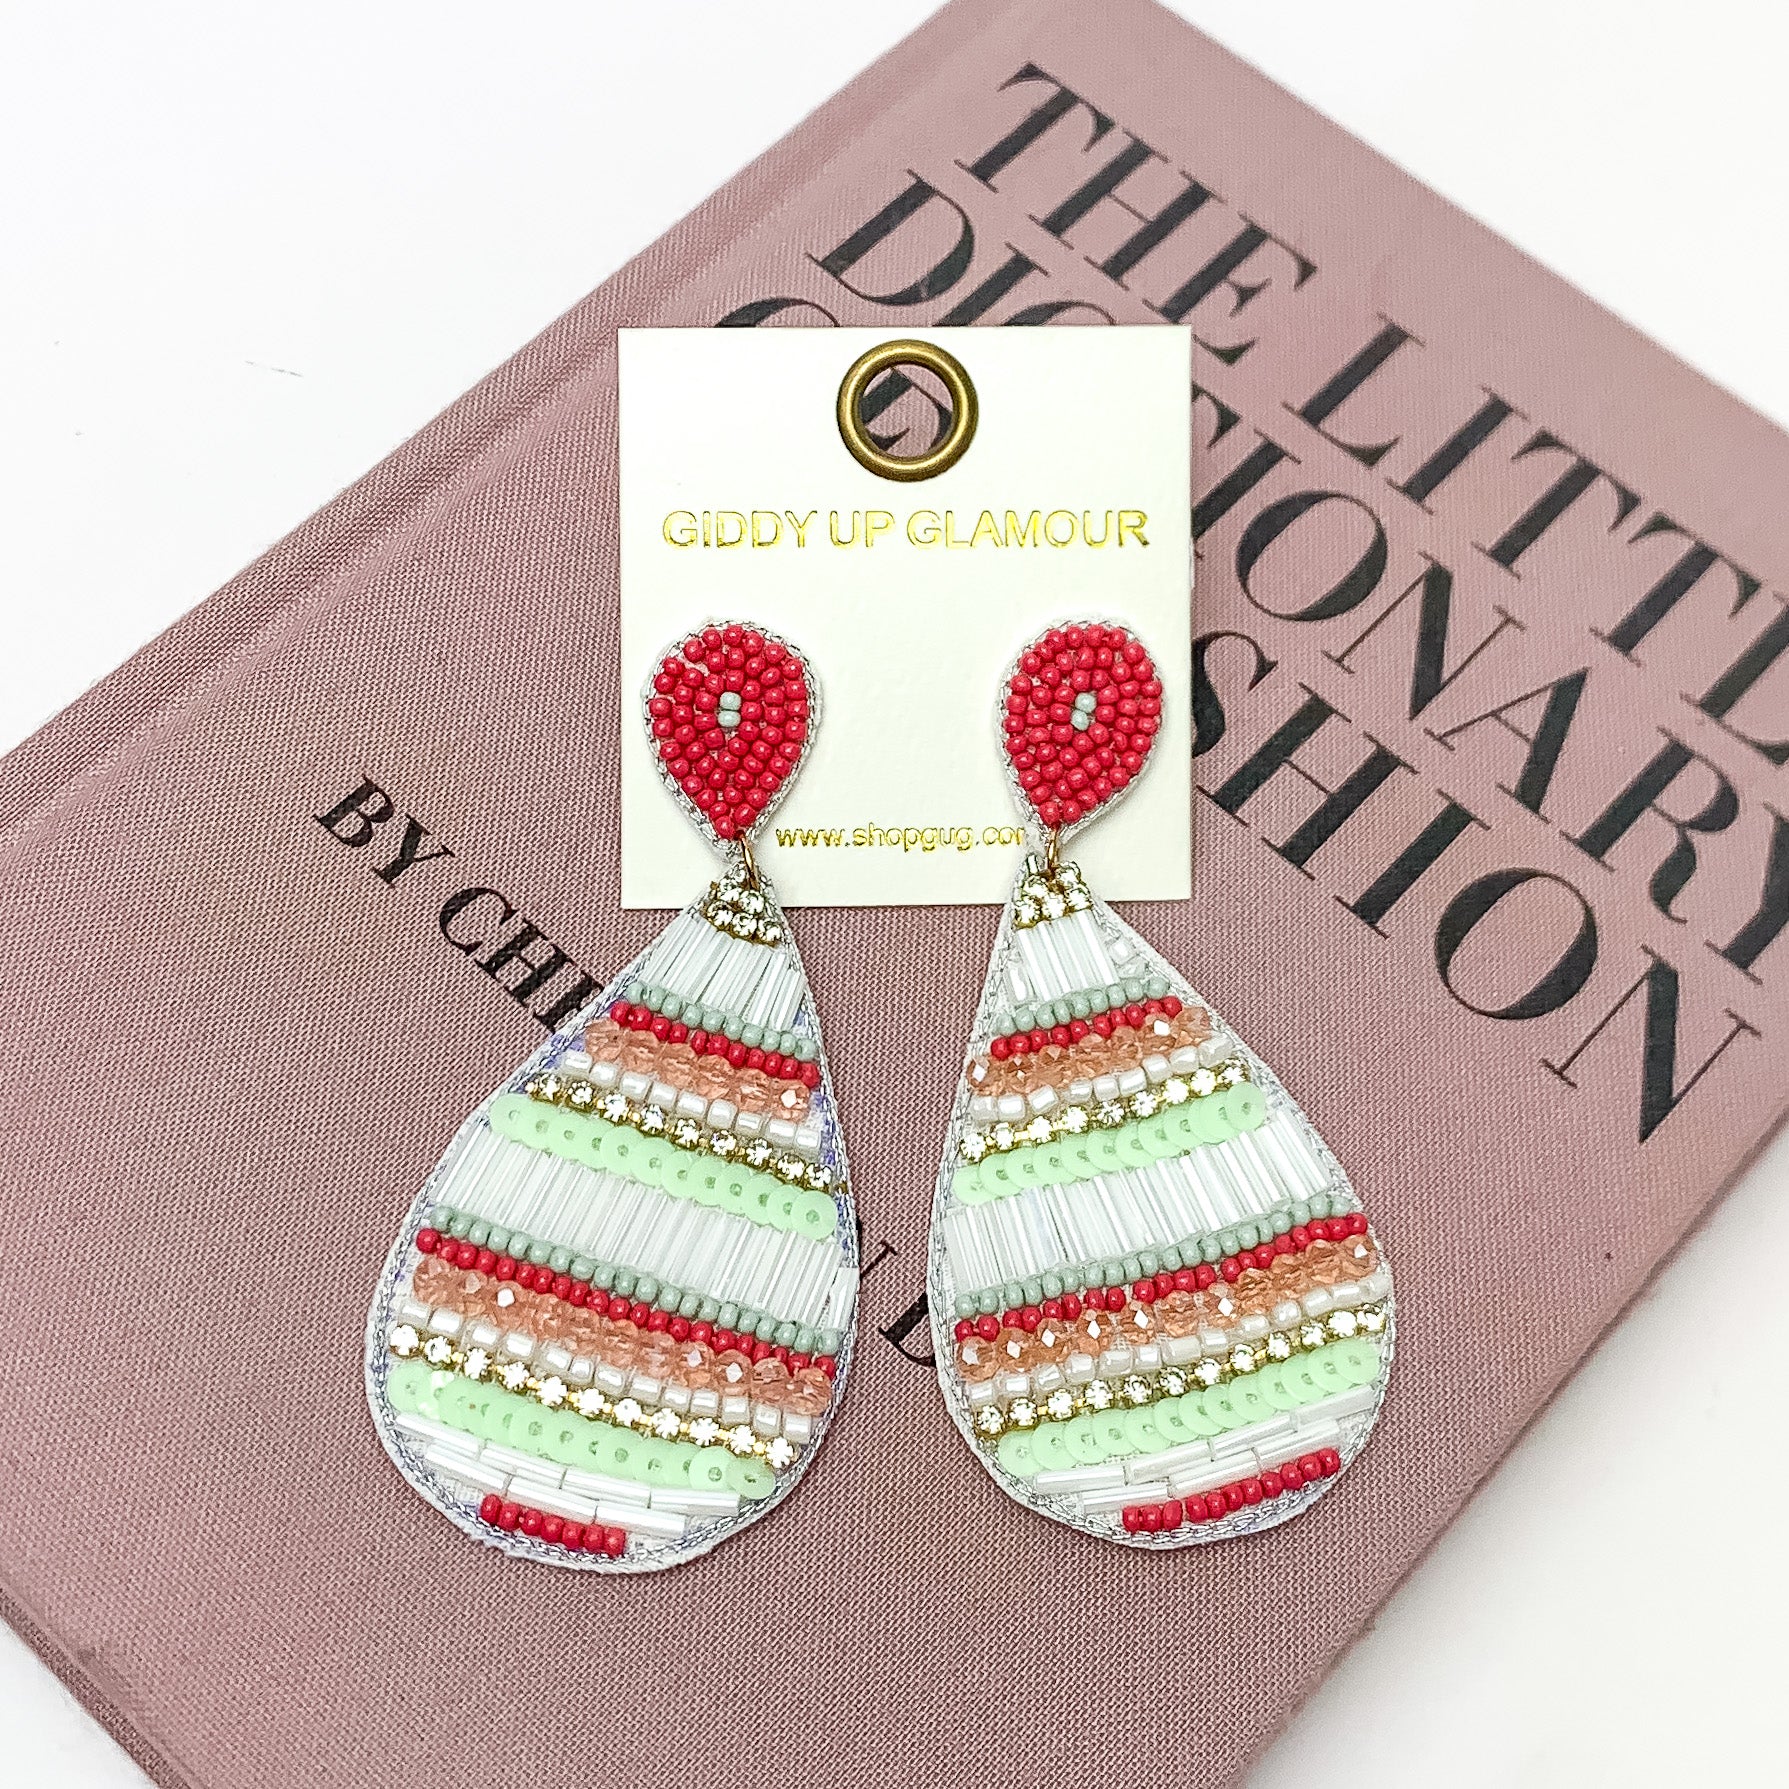 Beaded Teardrop Earrings in Multicolor With Clear Crystals. Pictured on a white background with the earrings laying on a book.